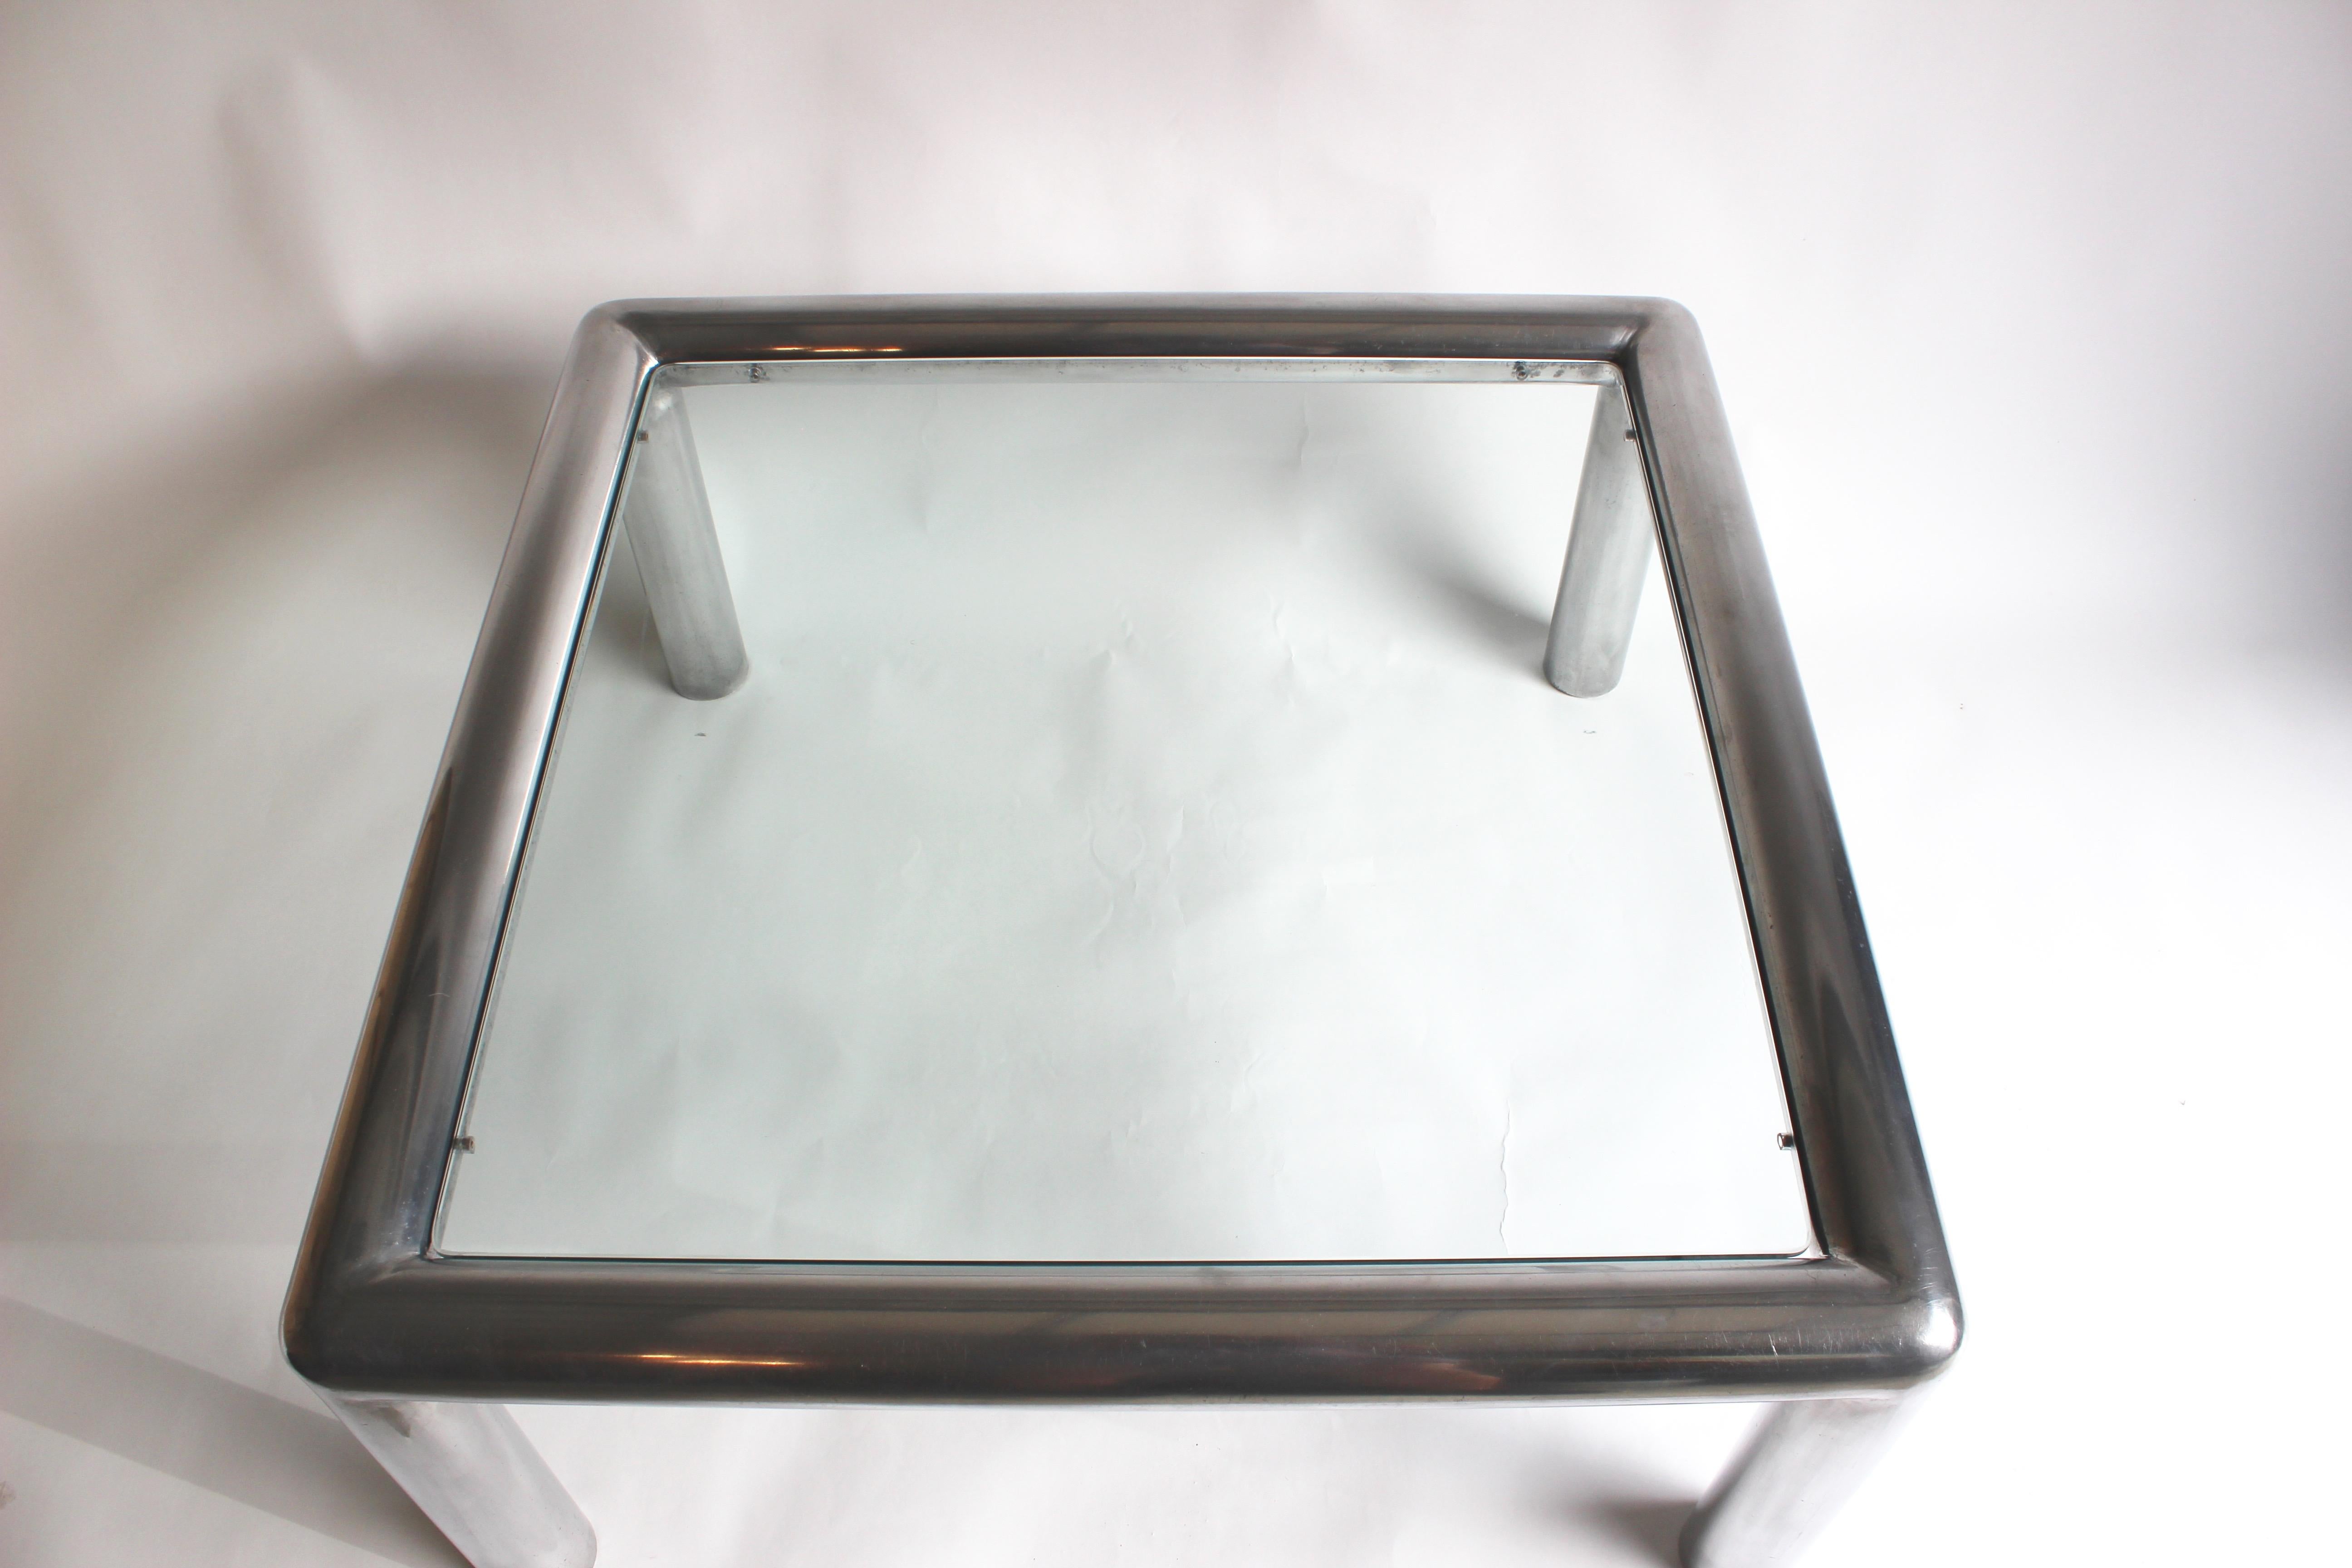 Aluminum coffee table by John Mascheroni with new glass top.